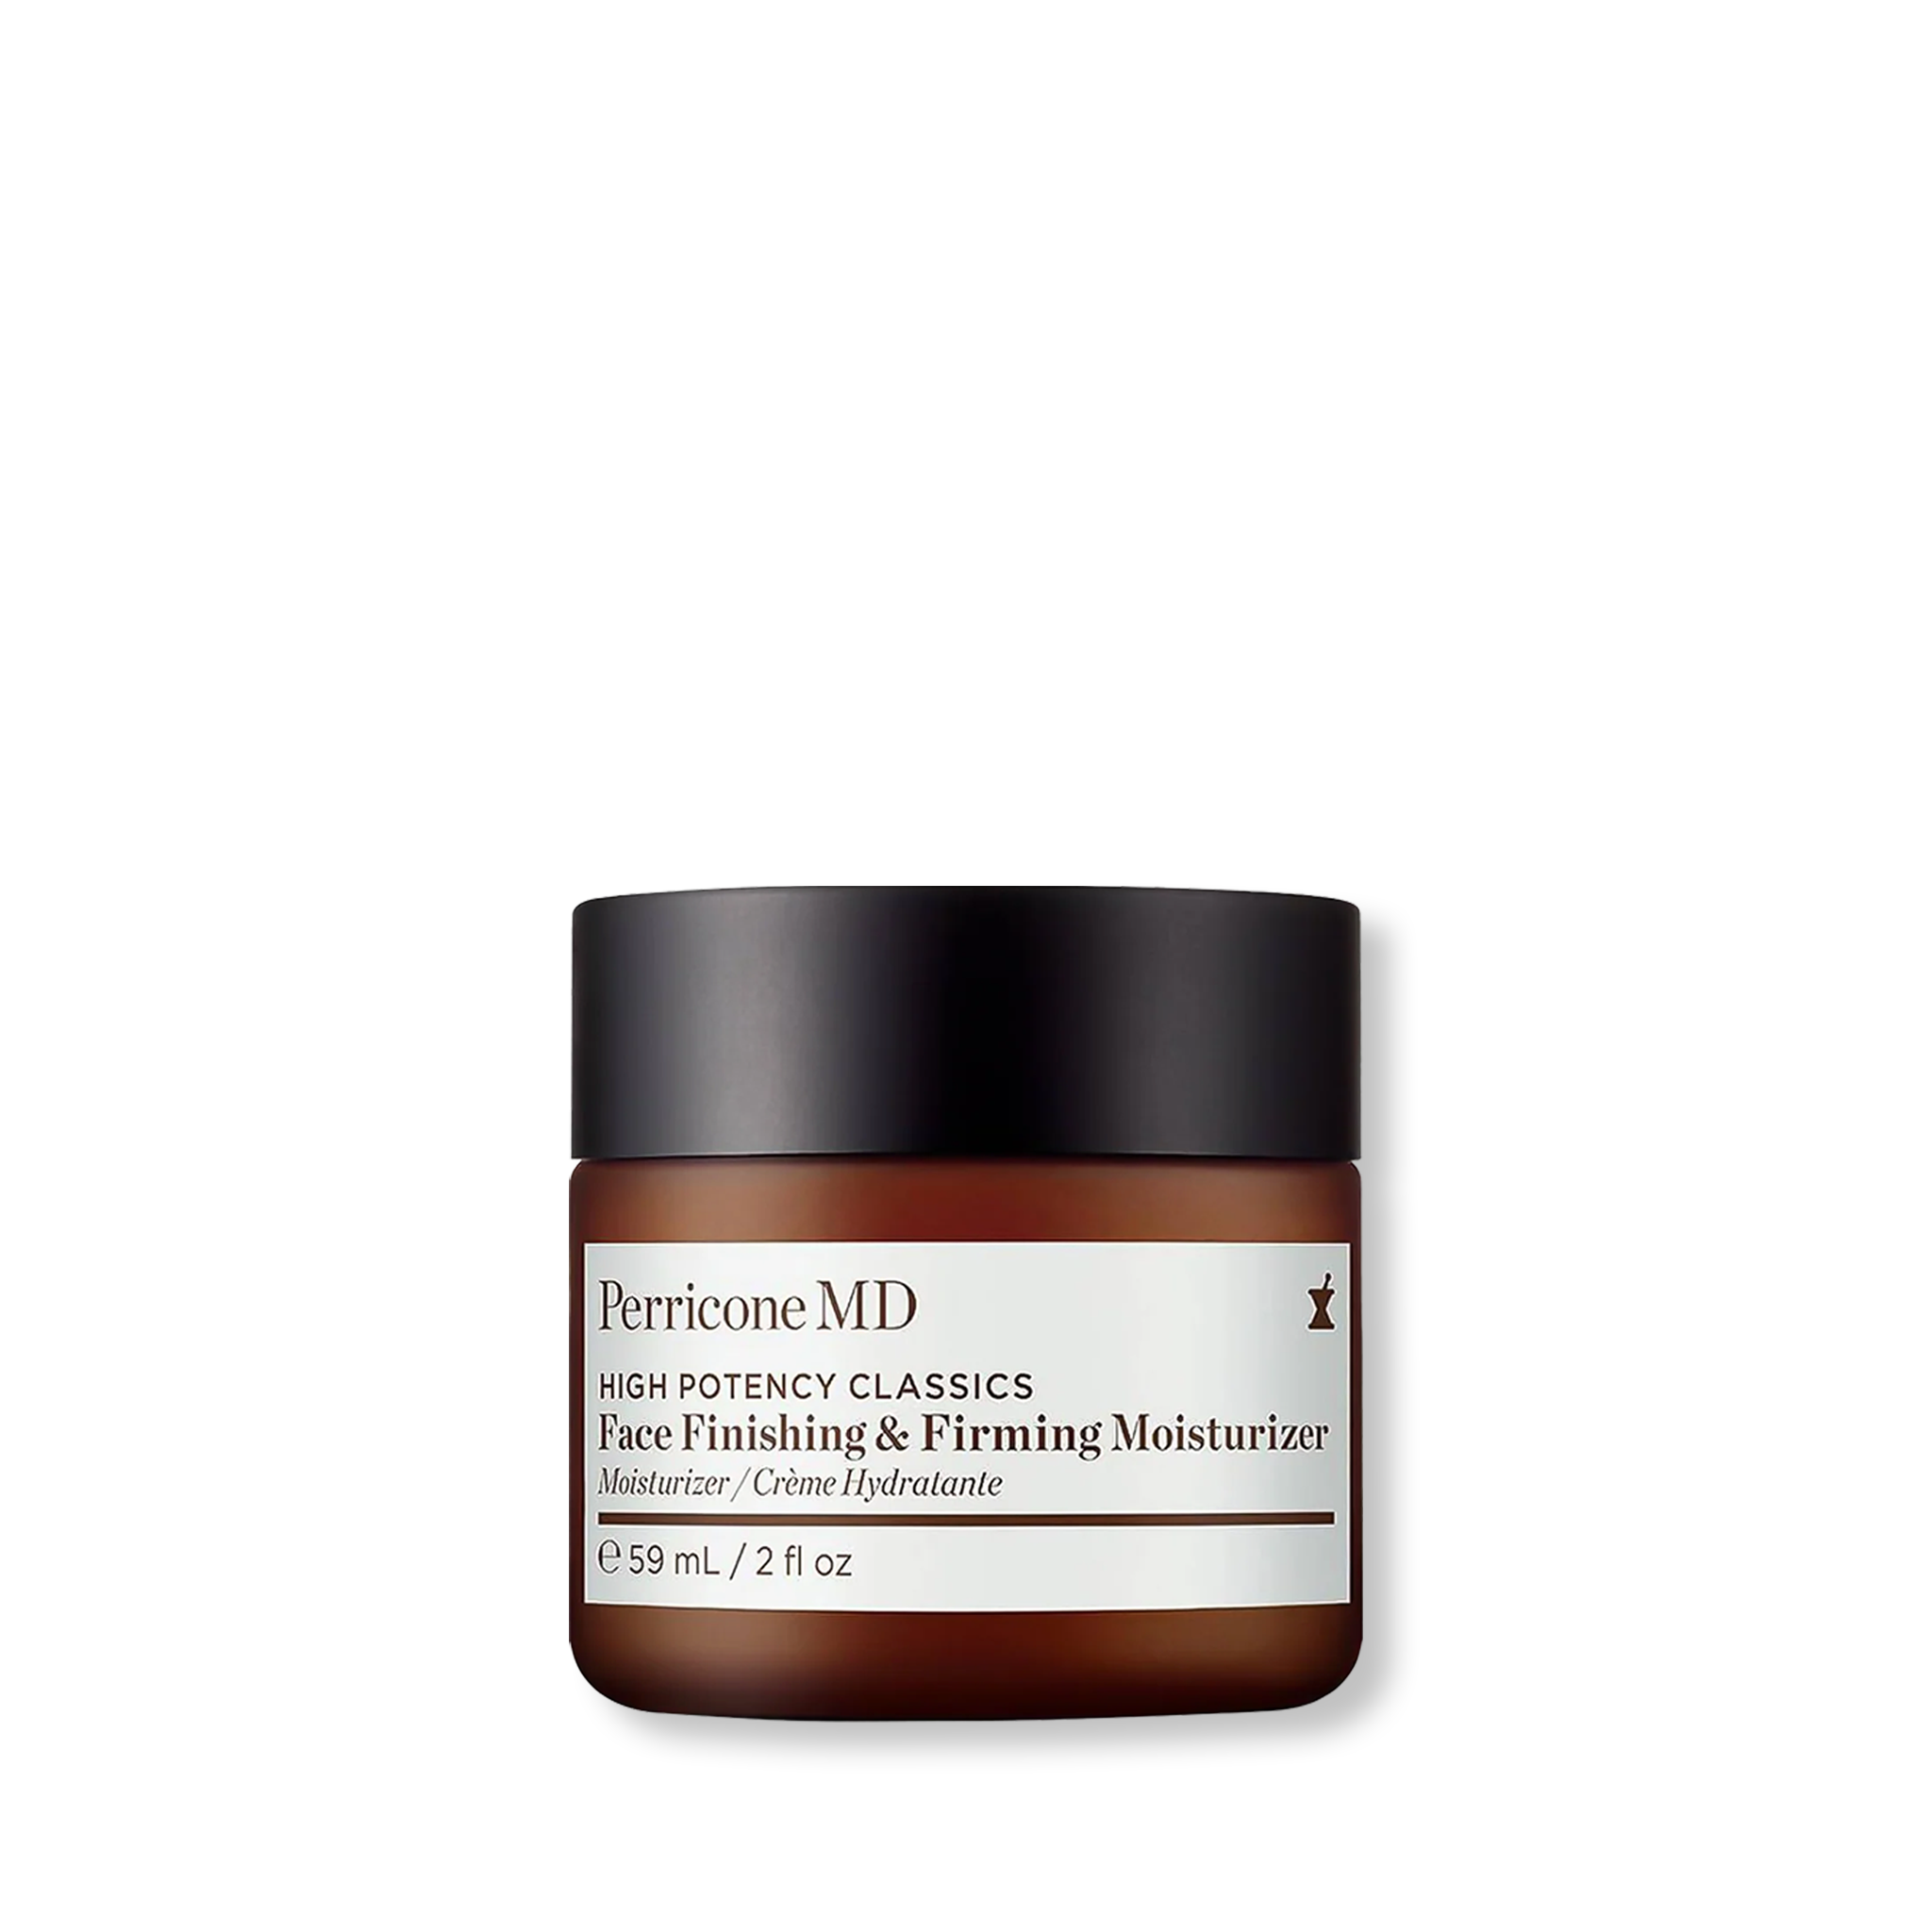 Perricone MD High Potency Classic Face Finishing & Firming Moisturizer